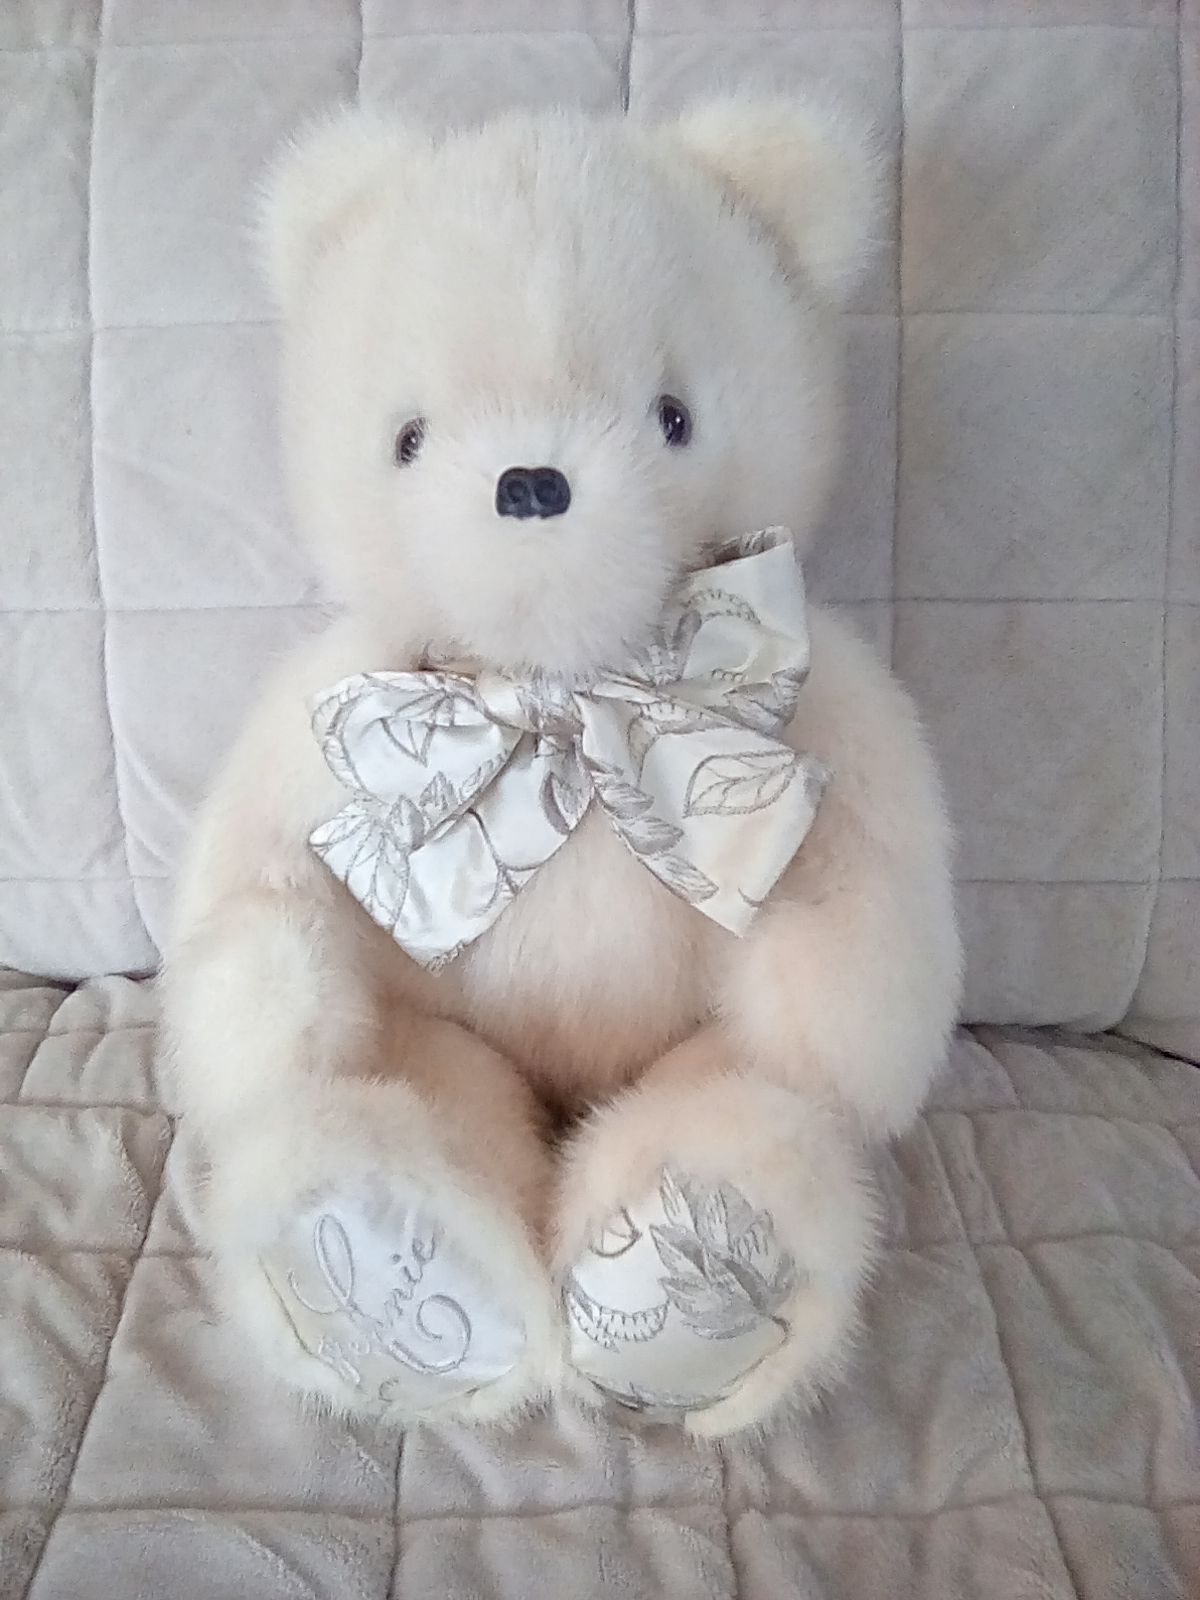 Rare Teddy Bear Initial BE Leather Paws White Fur 